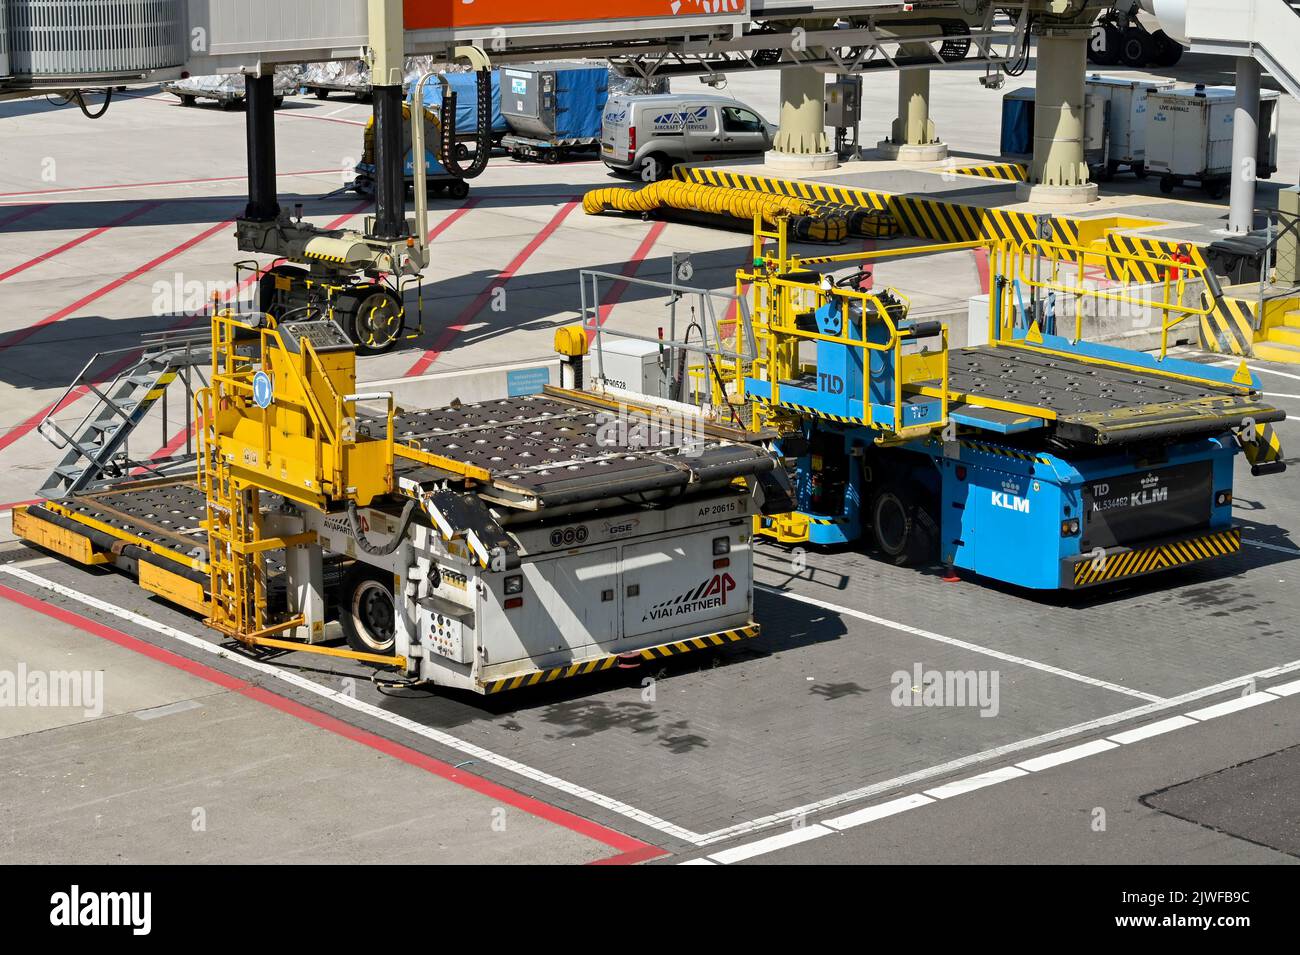 Amsterdam, Netherlands - August 2022: Air freight pallet loaders parked on the airport apron at Schipol airport Stock Photo